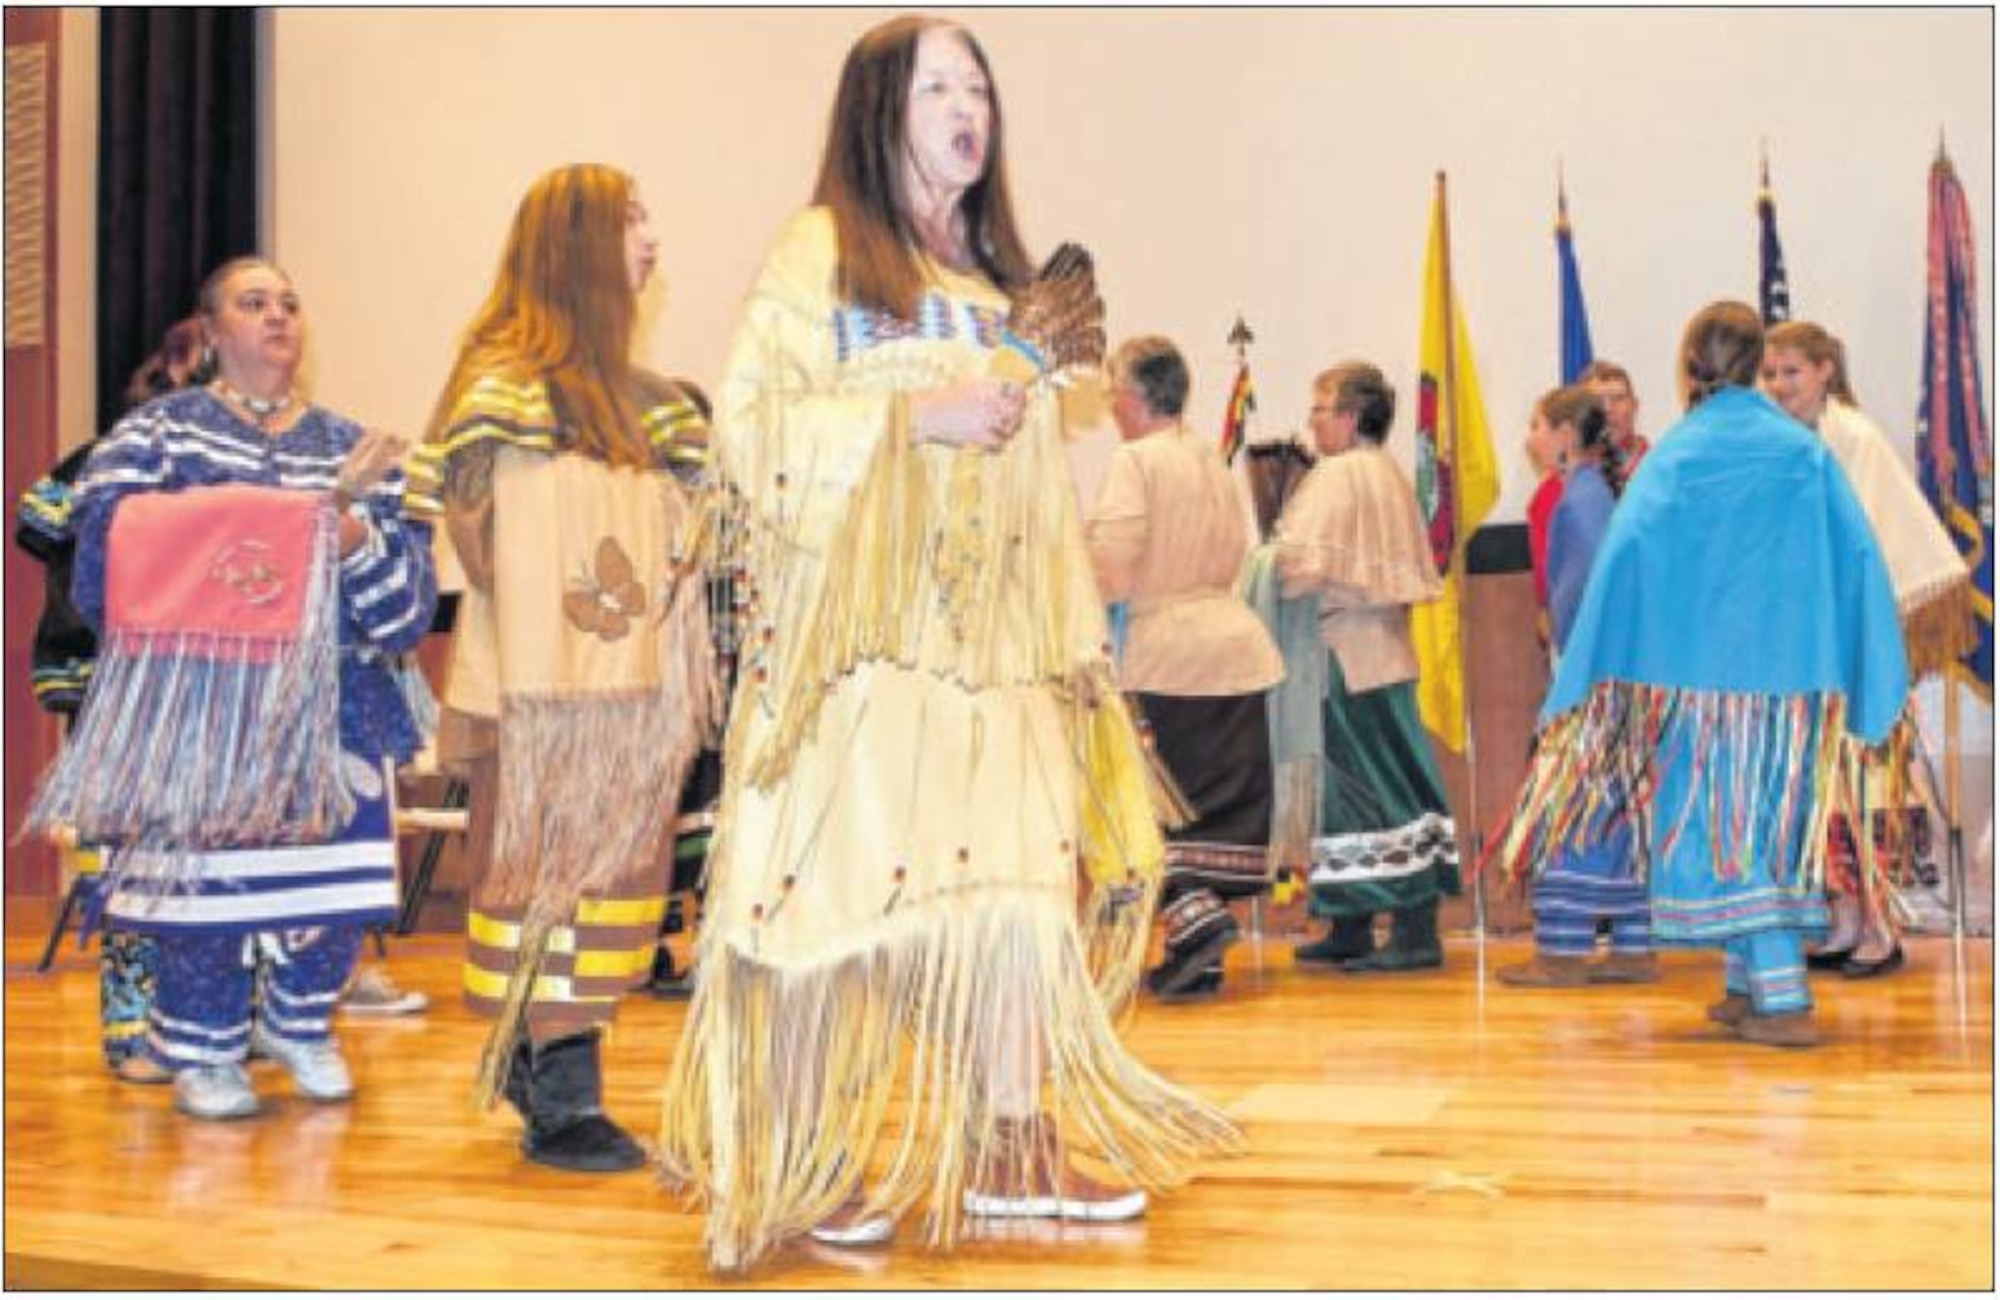 Members of the Miami Nation of Indians of Indiana demonstrate a traditional Native American blanket dance during a performance at the National Air and Space Intelligence Center on Nov. 7. The hour-long performance was held in recognition of National American Indian Heritage Month. (Air Force photos by Staff Sgt. Eunique Thomas)